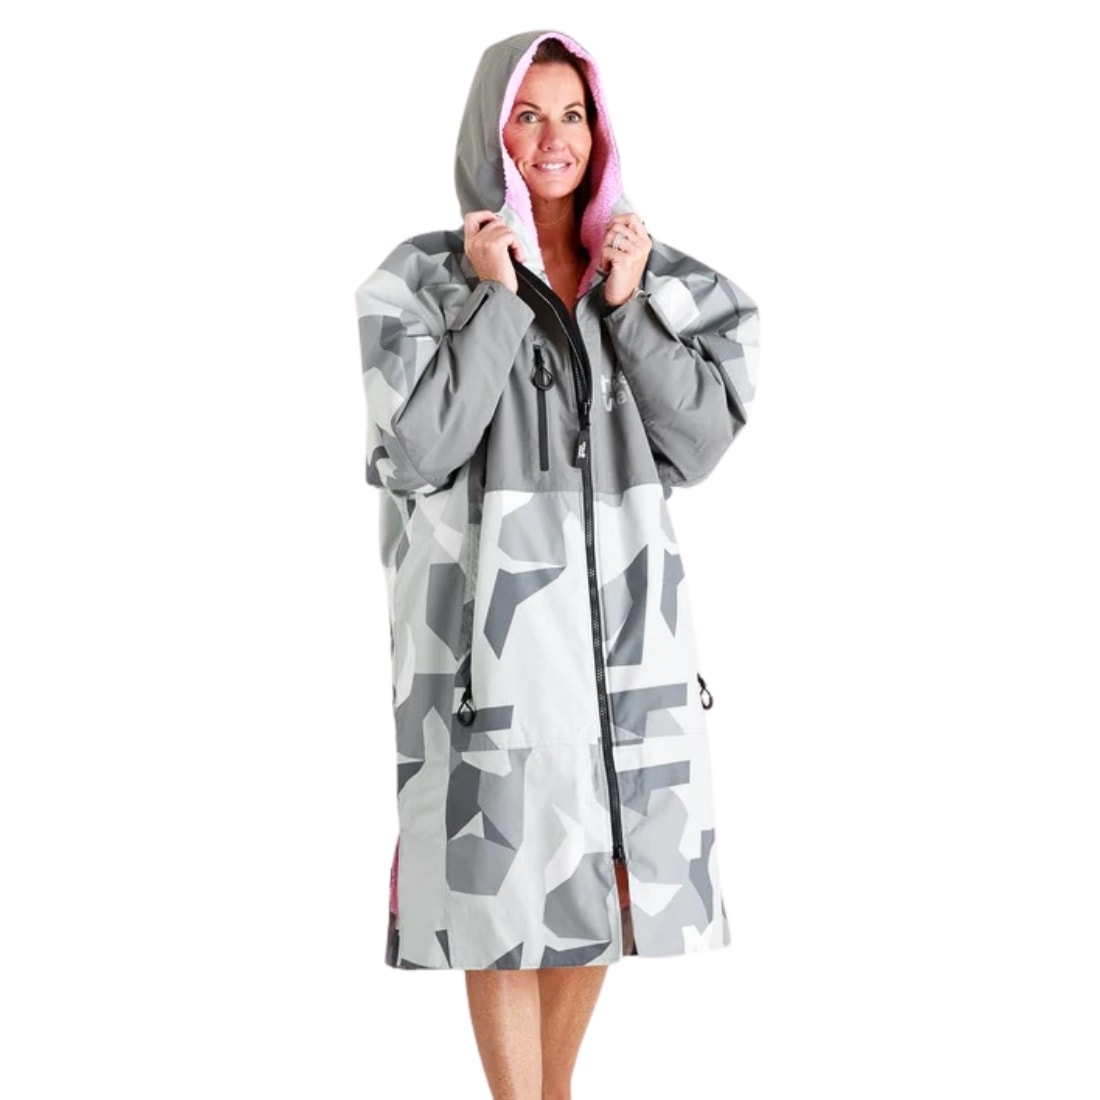 White Water Hard Shell Drying / Changing Robe - Arctic Camo/Pink - Changing Robe Poncho Towel by White Water